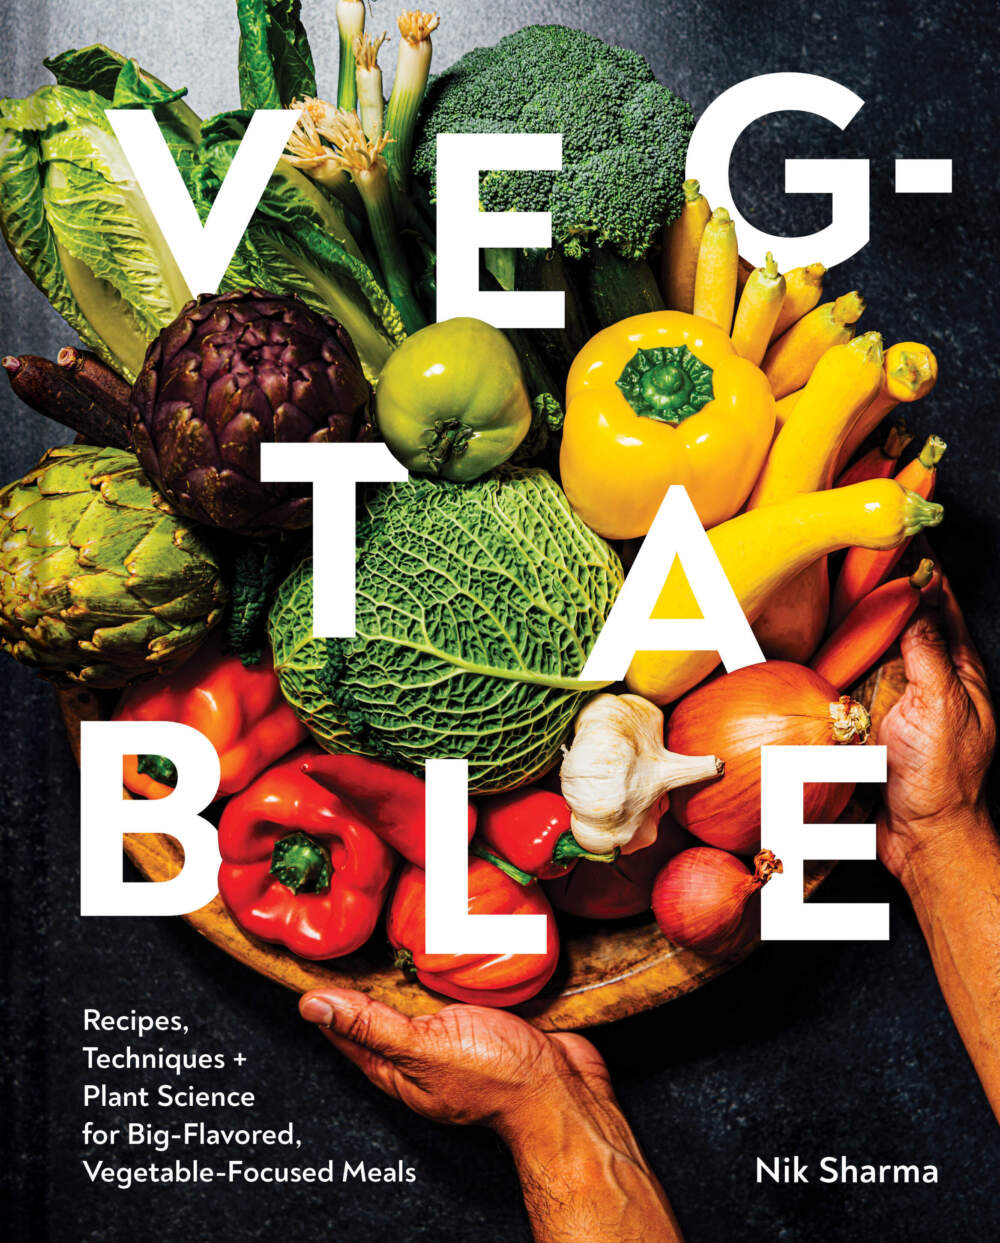 The cover of "Veg-table: Recipes, Techniques + Plant Science for Big-Flavored, Vegetable-Focused Meals." by Nik Sharma. (Courtesy)